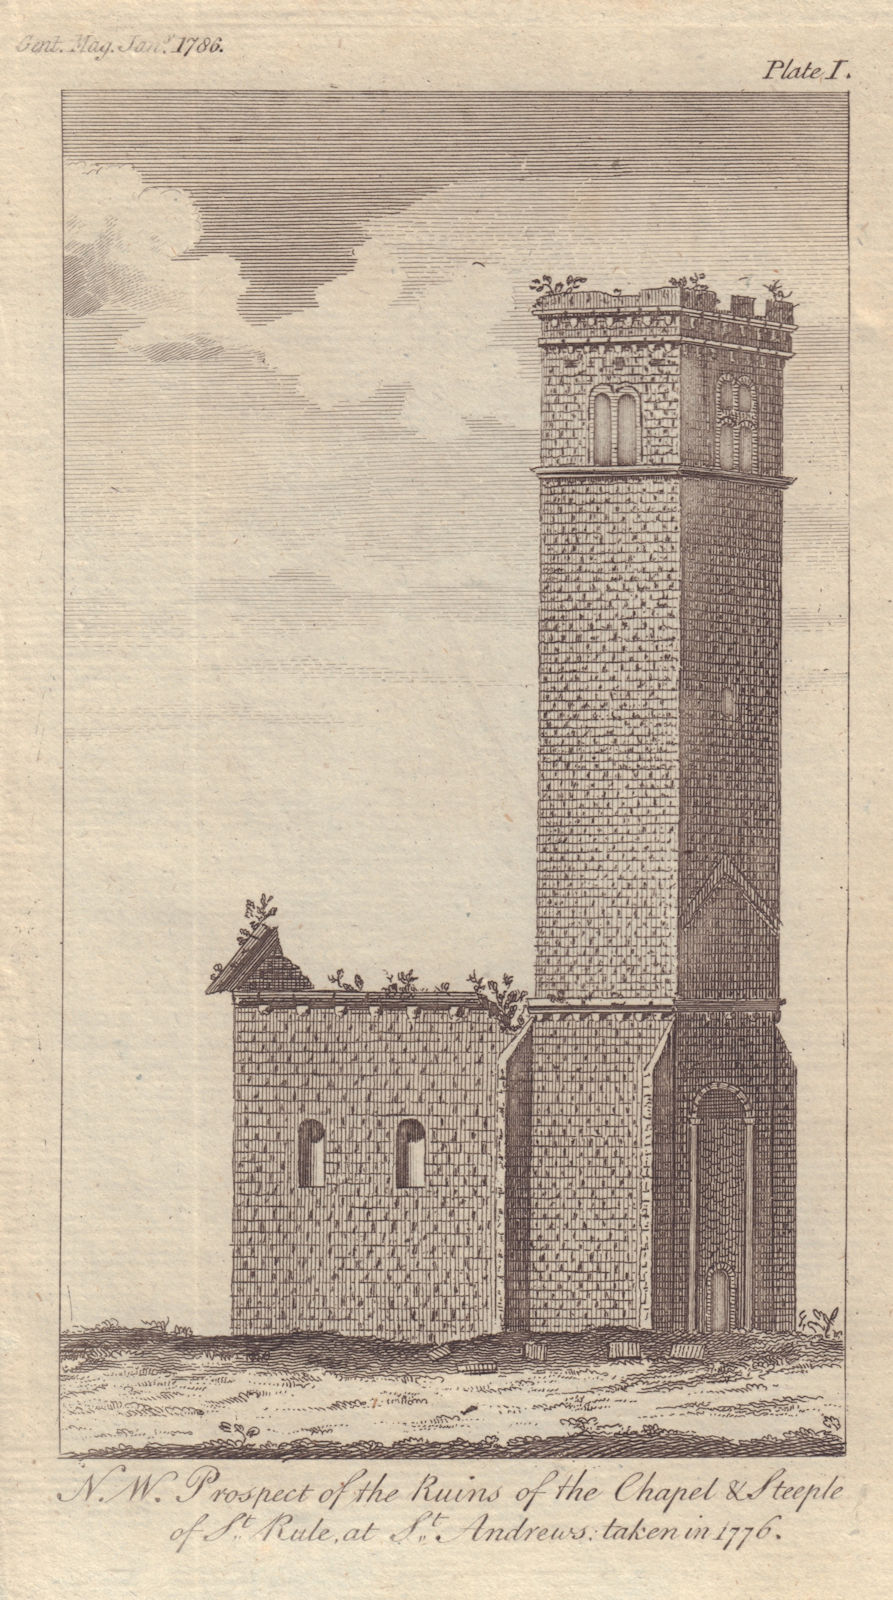 Associate Product NW Prospect of the ruins of the Chapel & Steeple of St. Rule at St. Andrews 1786